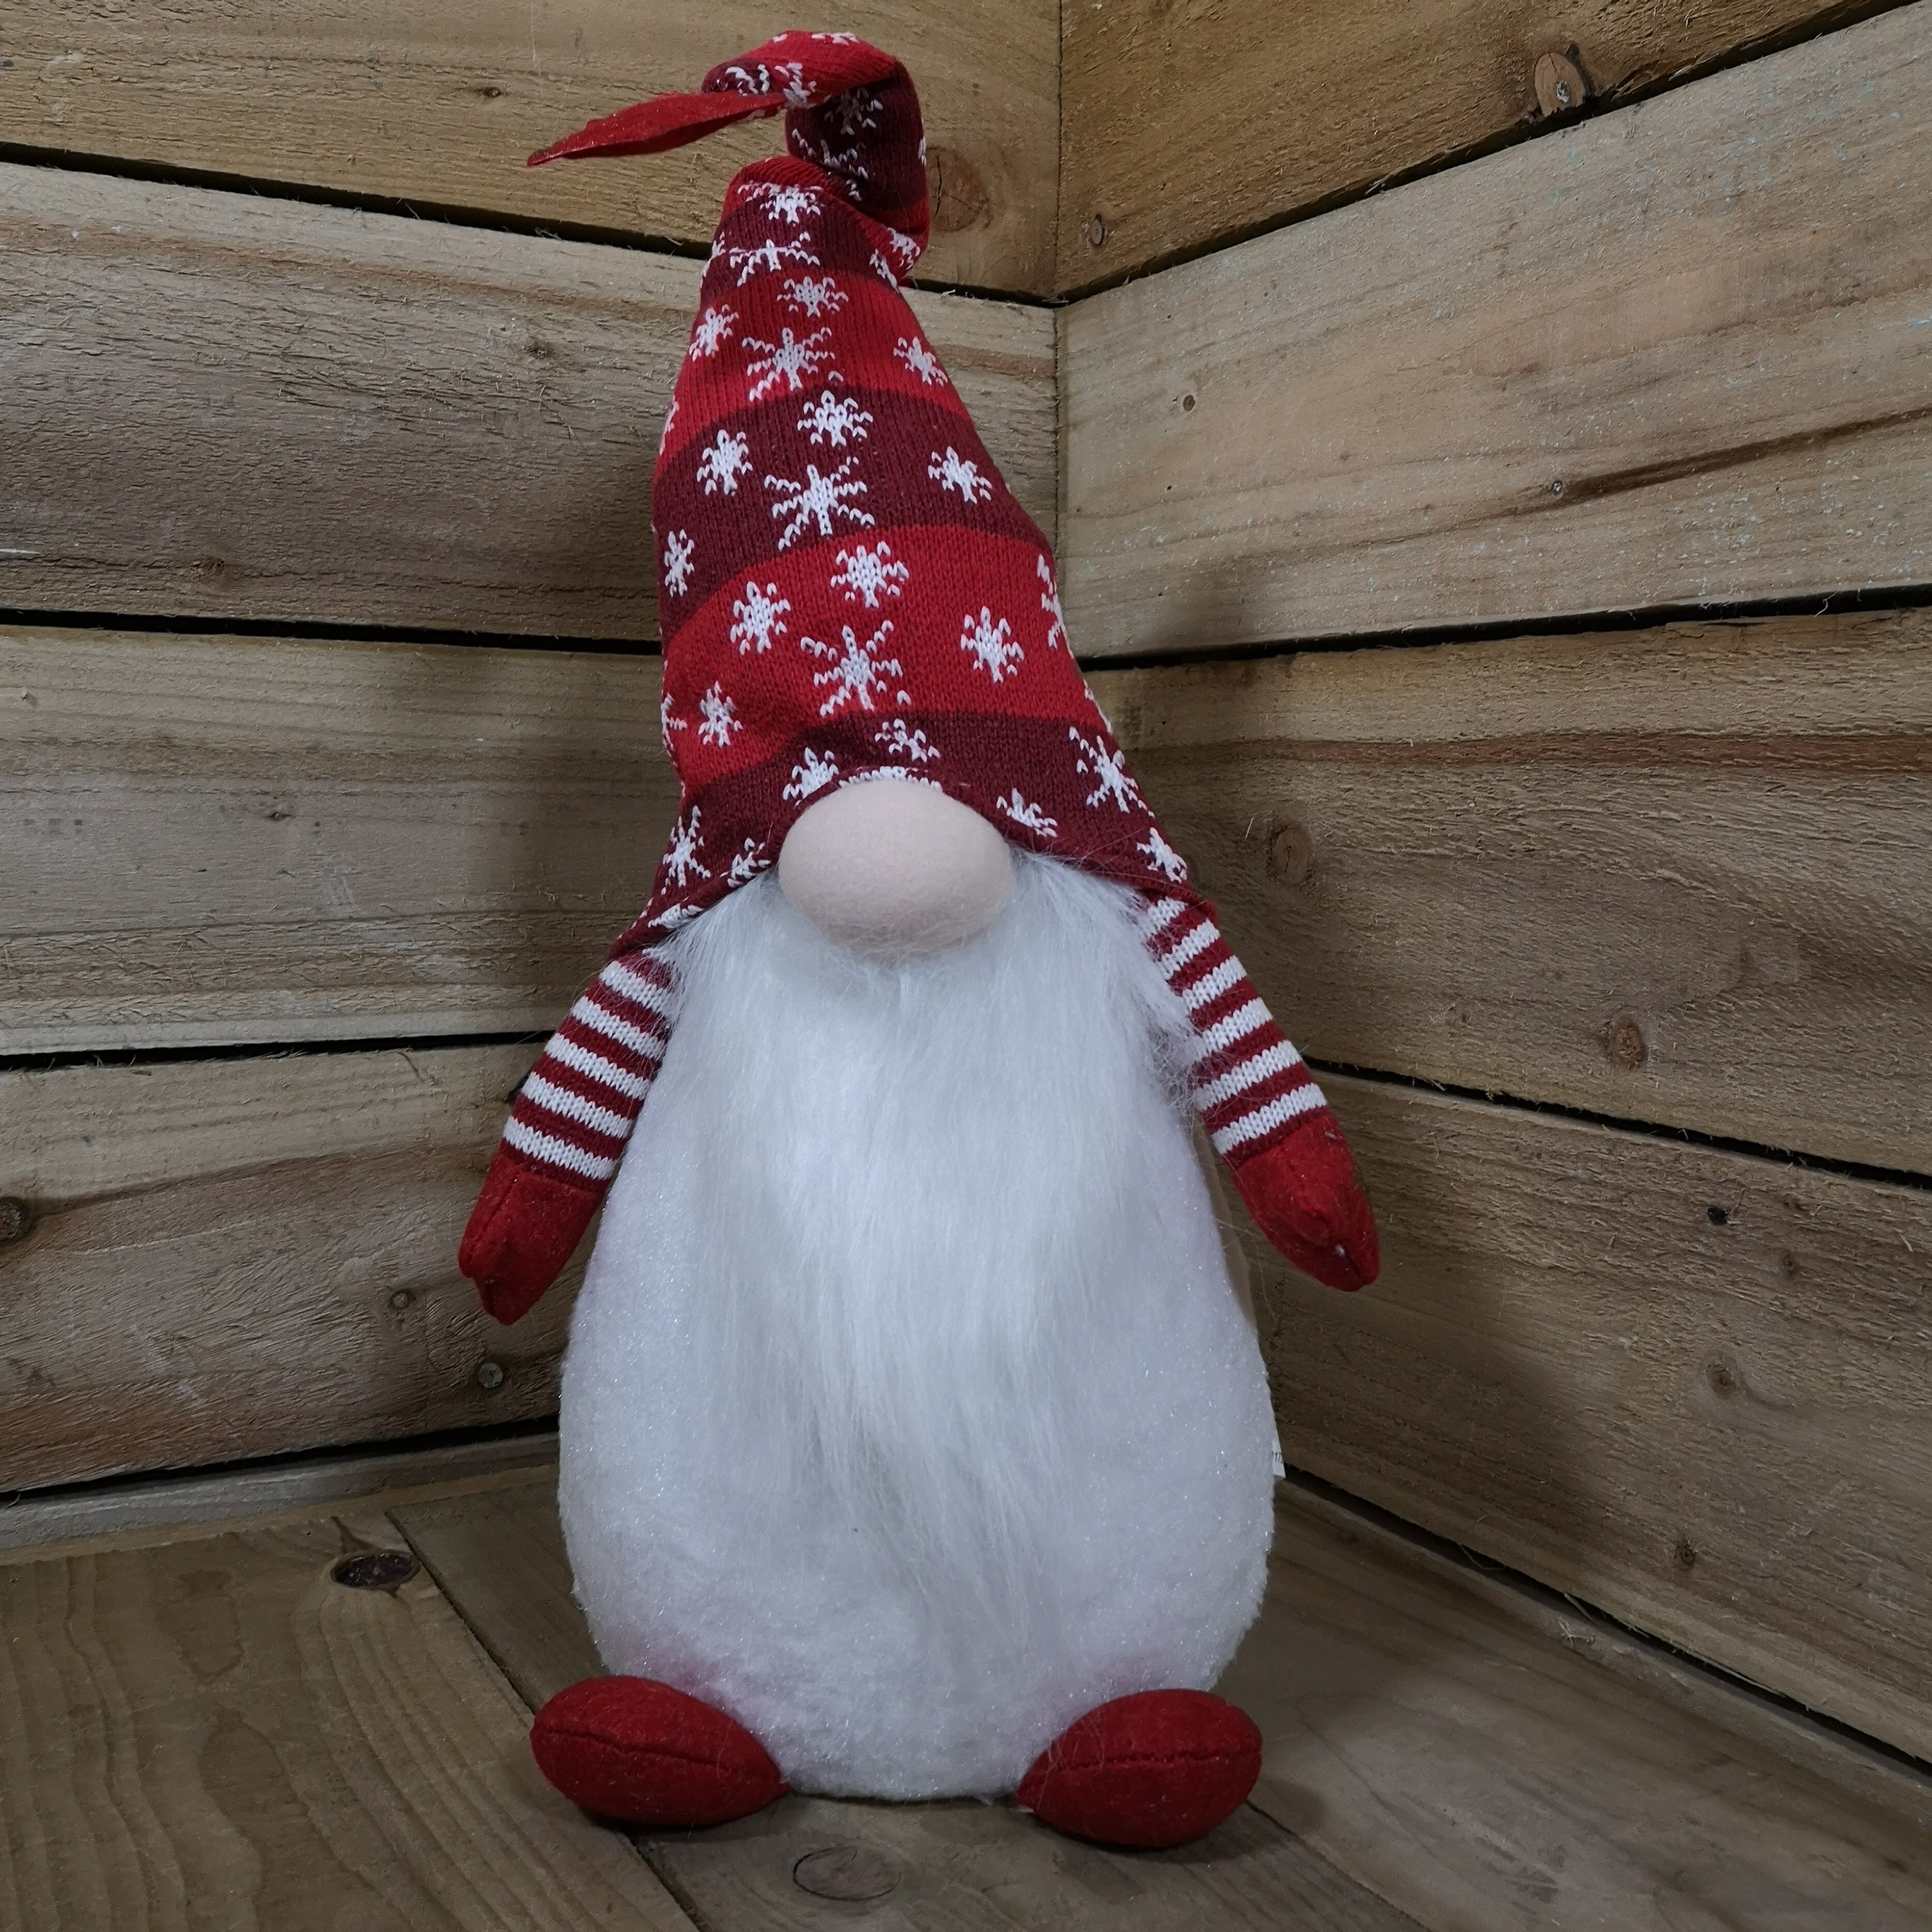 66cm Tall Light Up Christmas Gnome Gonk Decoration Red Snowflake Hat Sitting